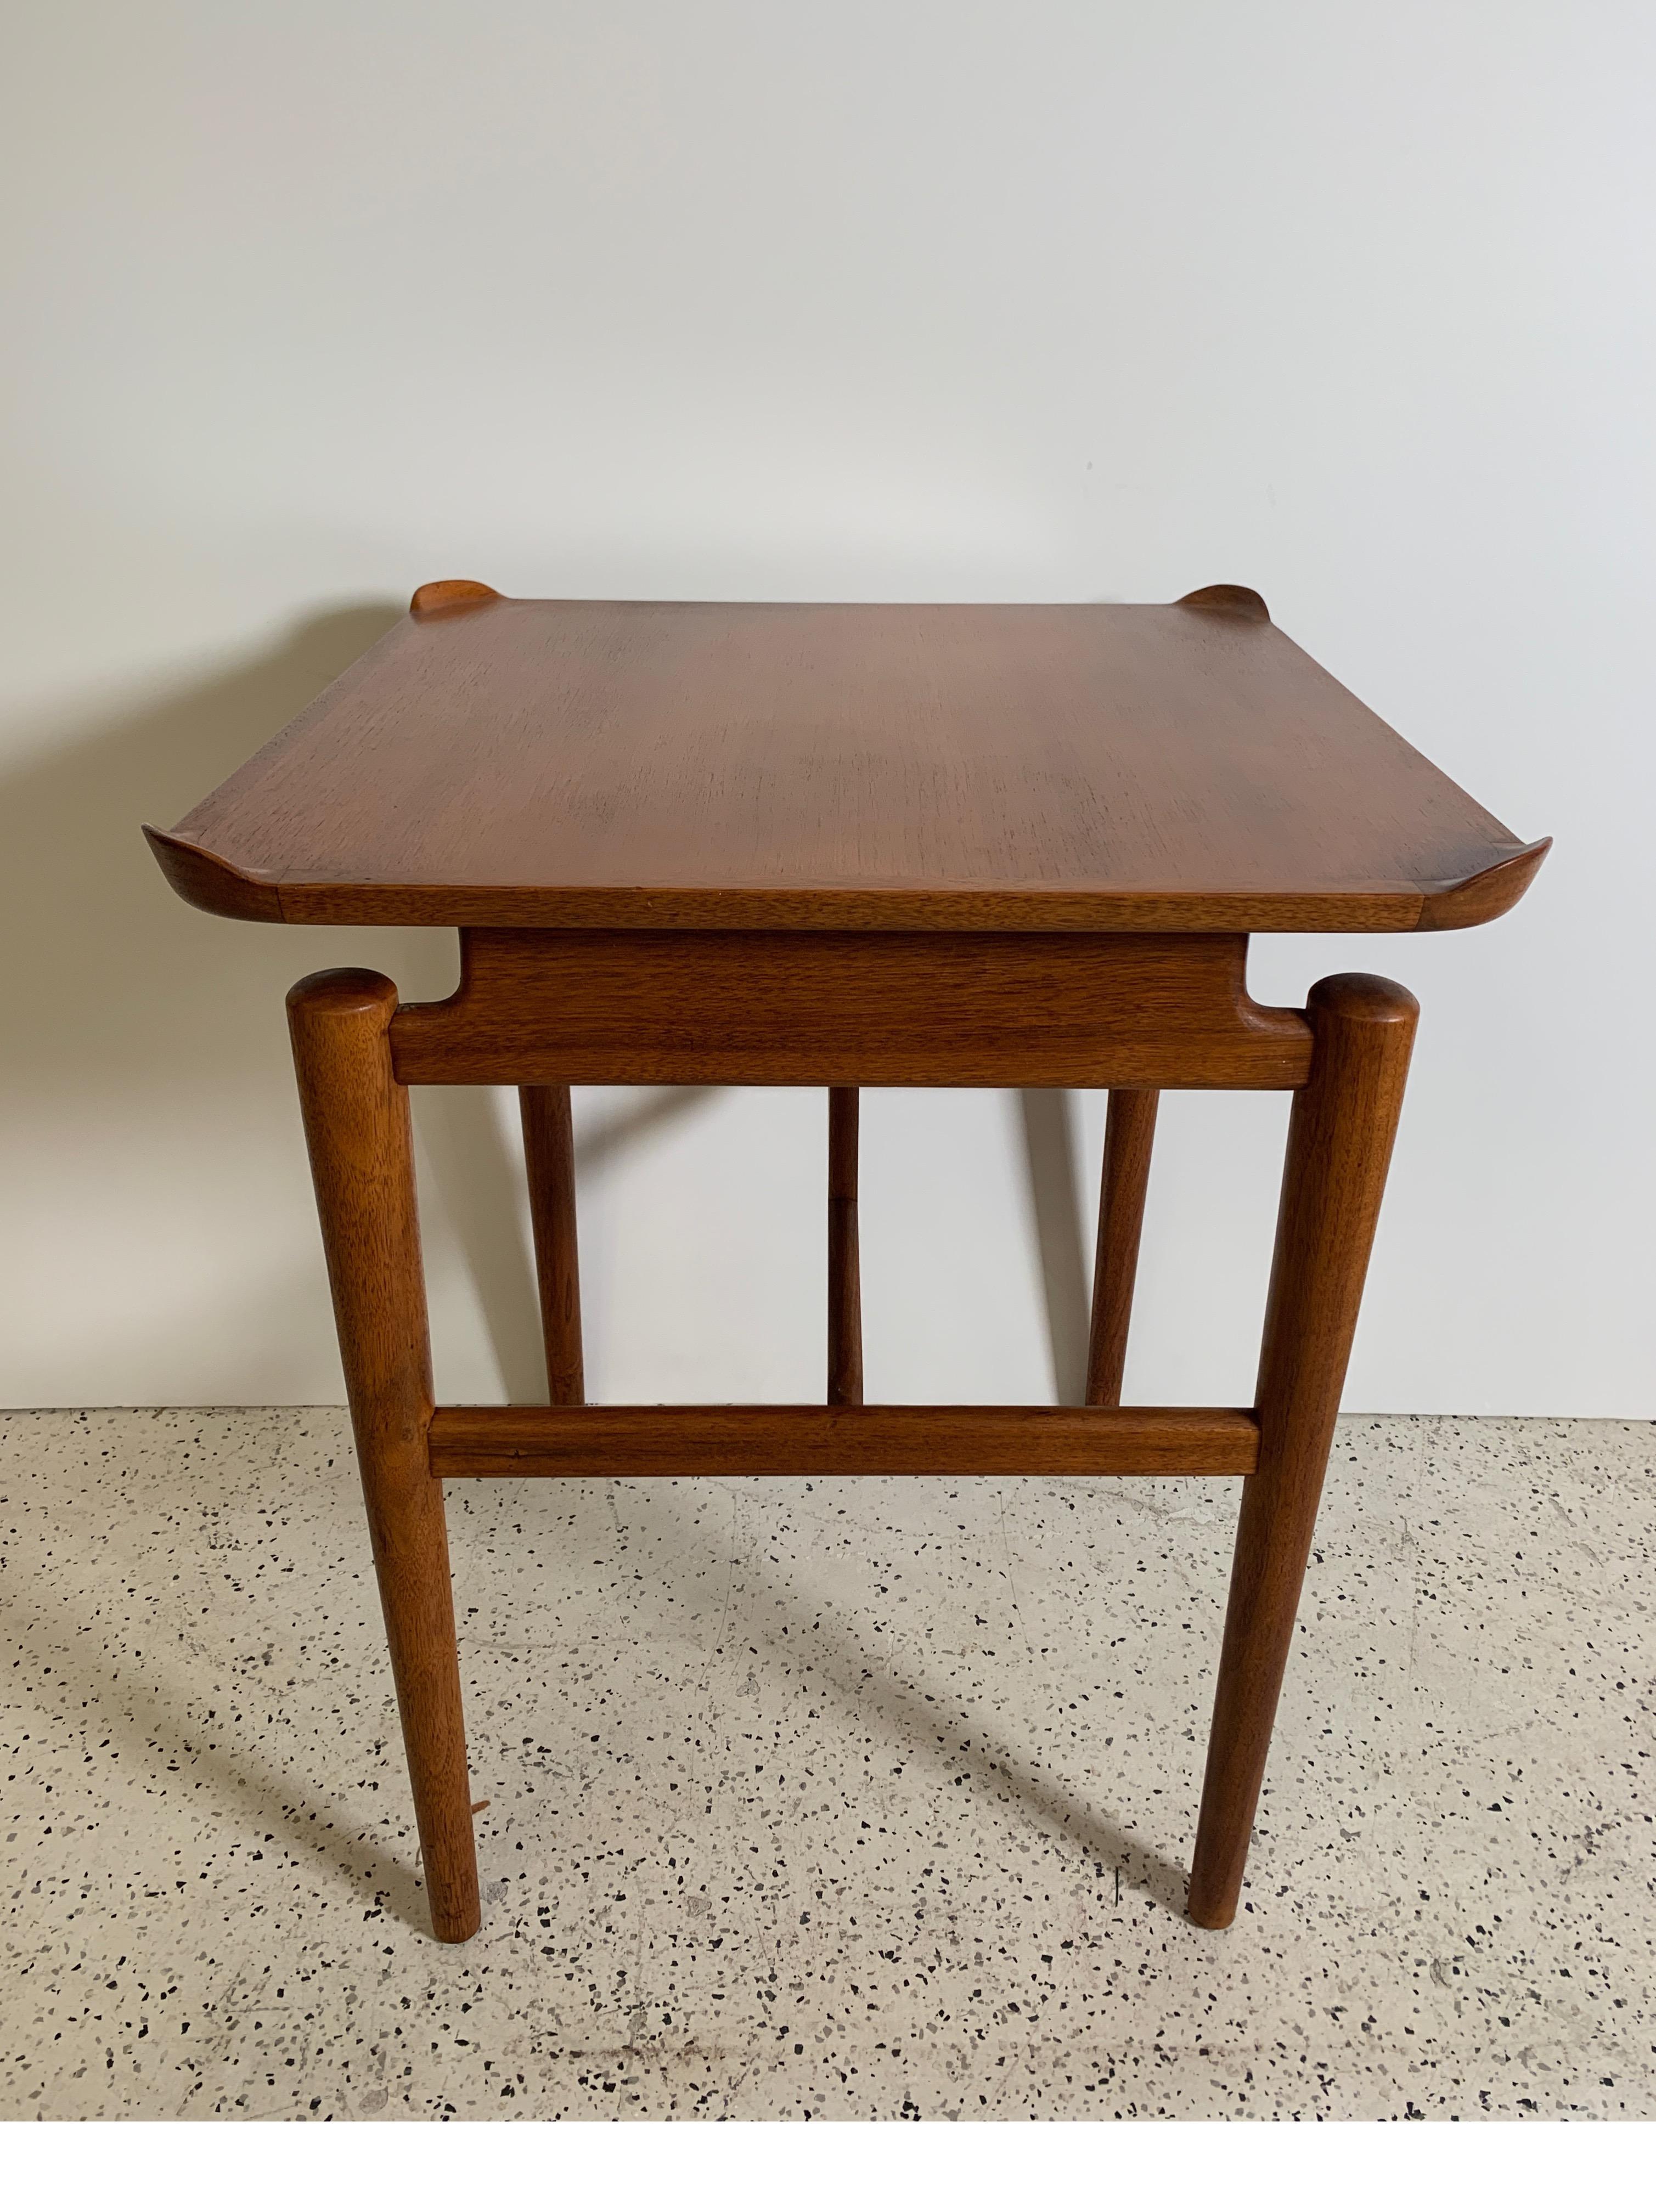 Lovely and uncommon sculpted, floating top end table in walnut designed by Finn Juhl for Baker Furniture Company, USA, 1954. The elegant lines in this piece, as well as in certain other pieces of his work, testify to the inspiration Juhl got from